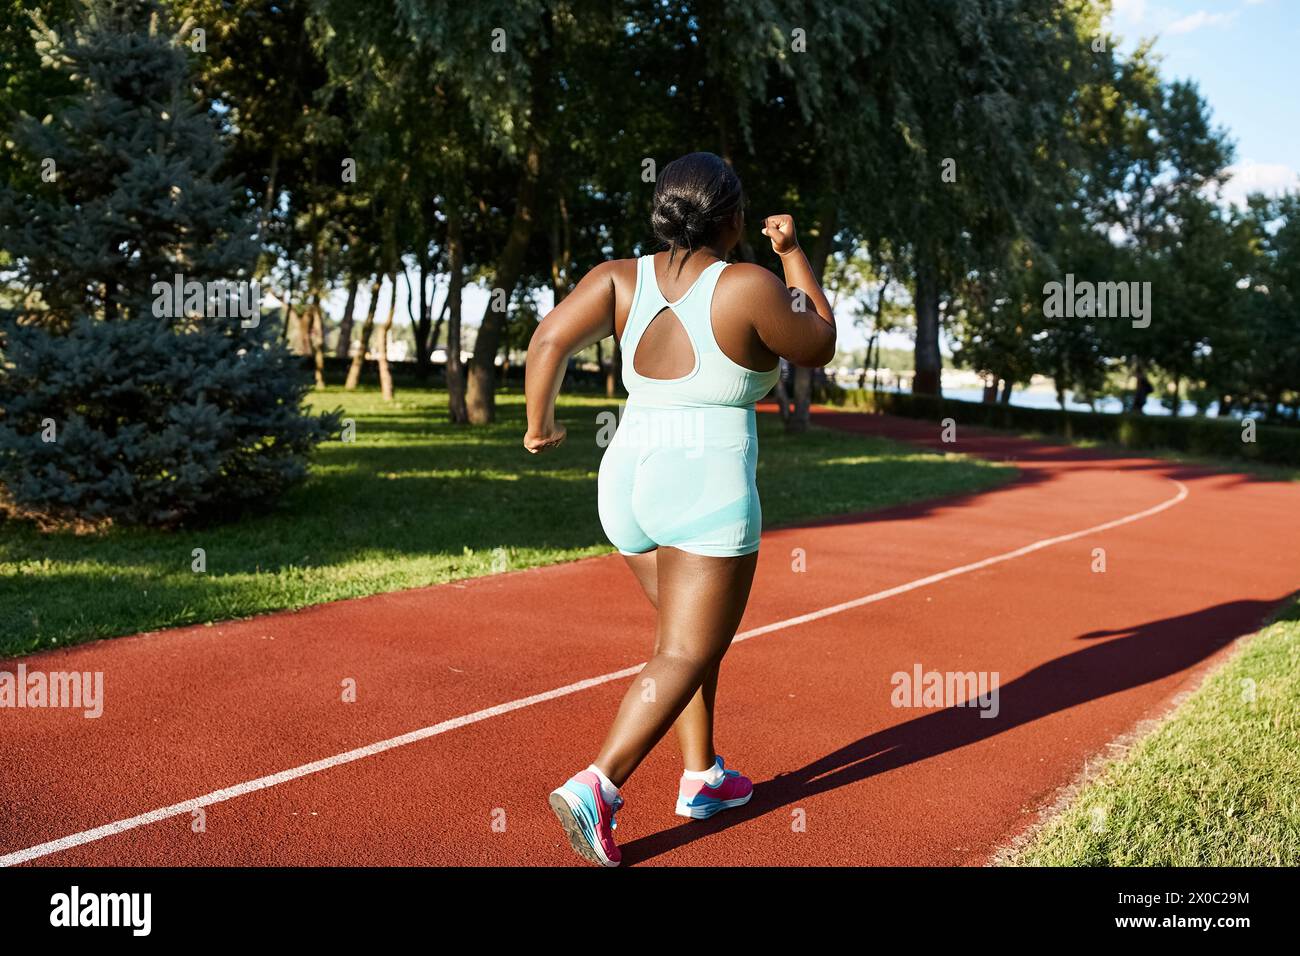 An African American woman in sportswear runs along a red track, showcasing body positivity and athleticism. Stock Photo